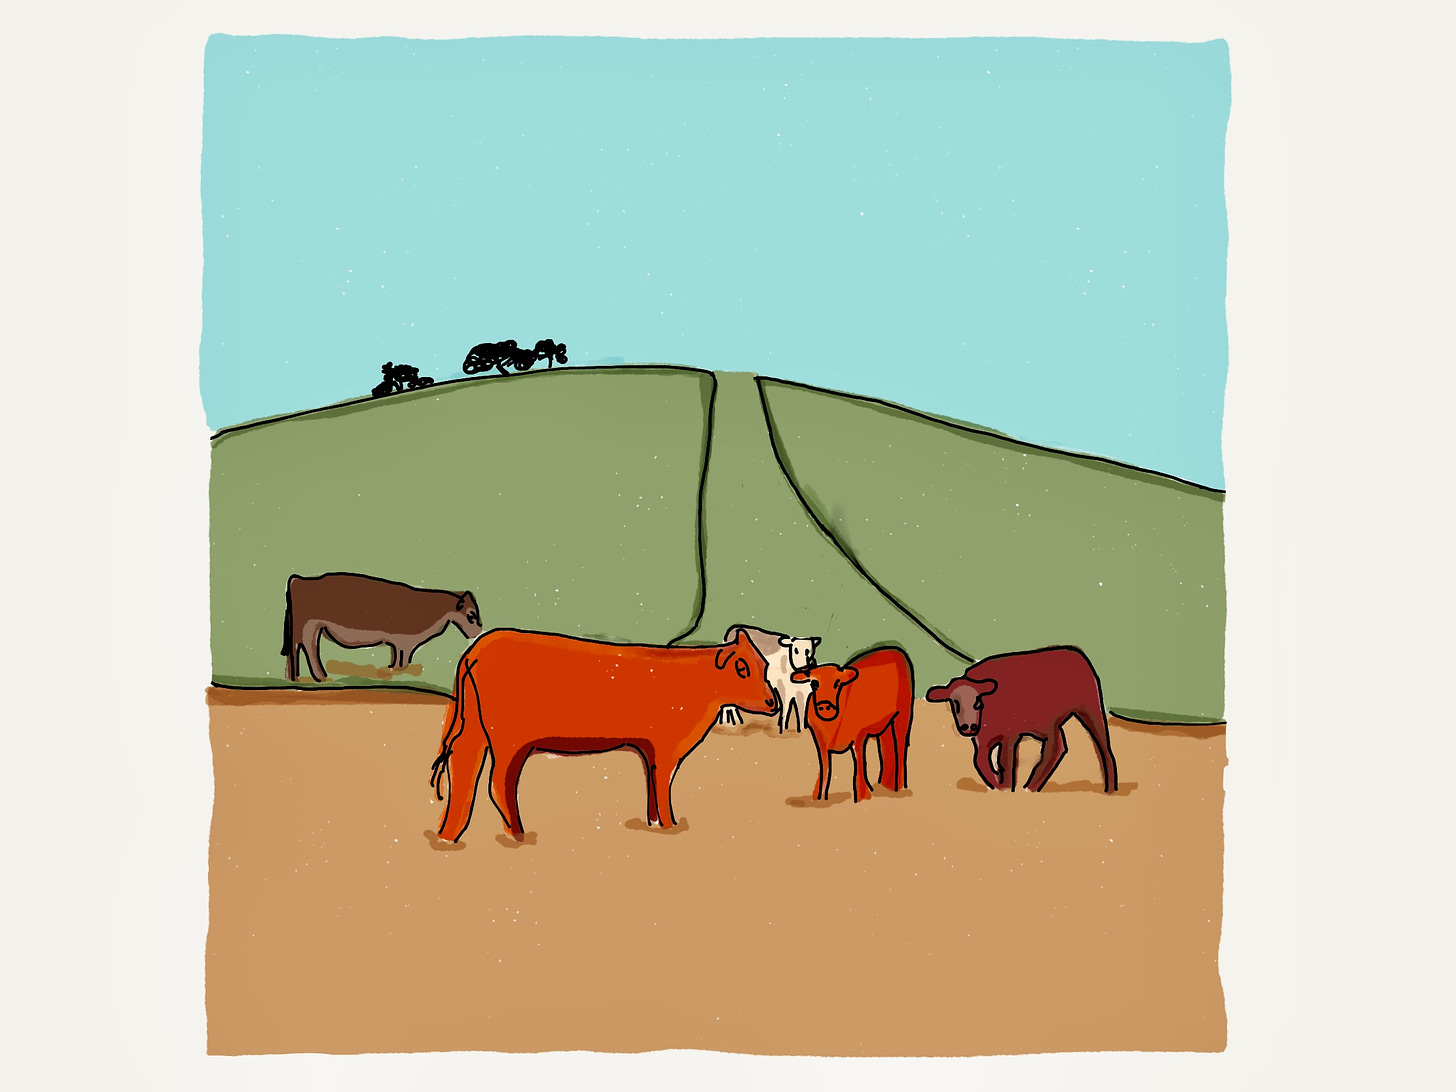 drawing of cows in a field with a green hill in the background and blue sky above it